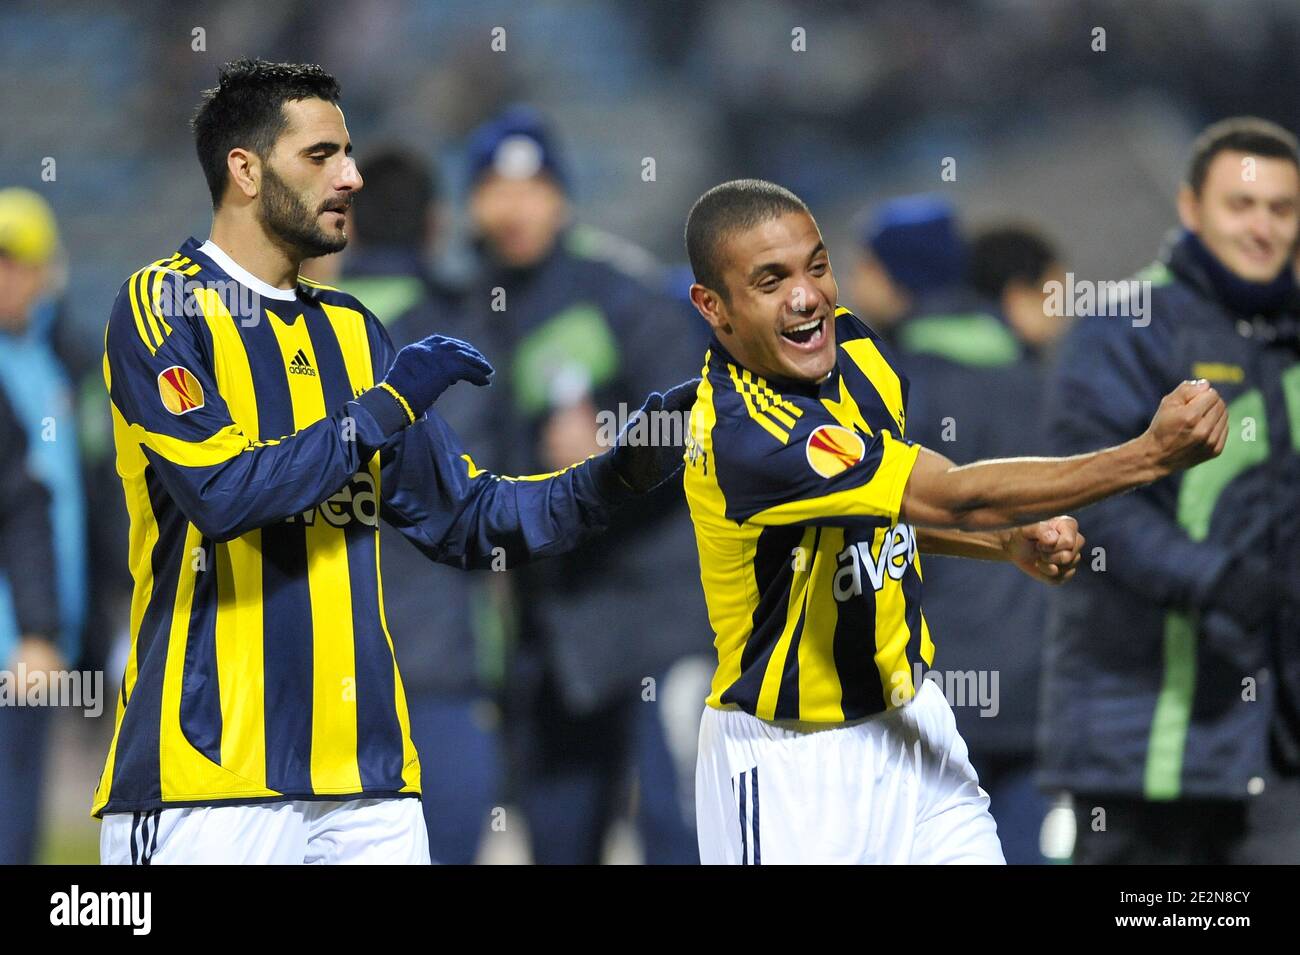 Fenerbahce's Gokcek Vederson celebrates his goal with Daniel Guiza during the UEFA Europa League soccer match, LOSC Lille Metropole vs Fenerbahce SK at the Stadium Nord in Villeneuve d'Ascq, France on February 18, 2010. Lille won 2-1. Photo by Stephane Reix/ABACAPRESS.COM Stock Photo